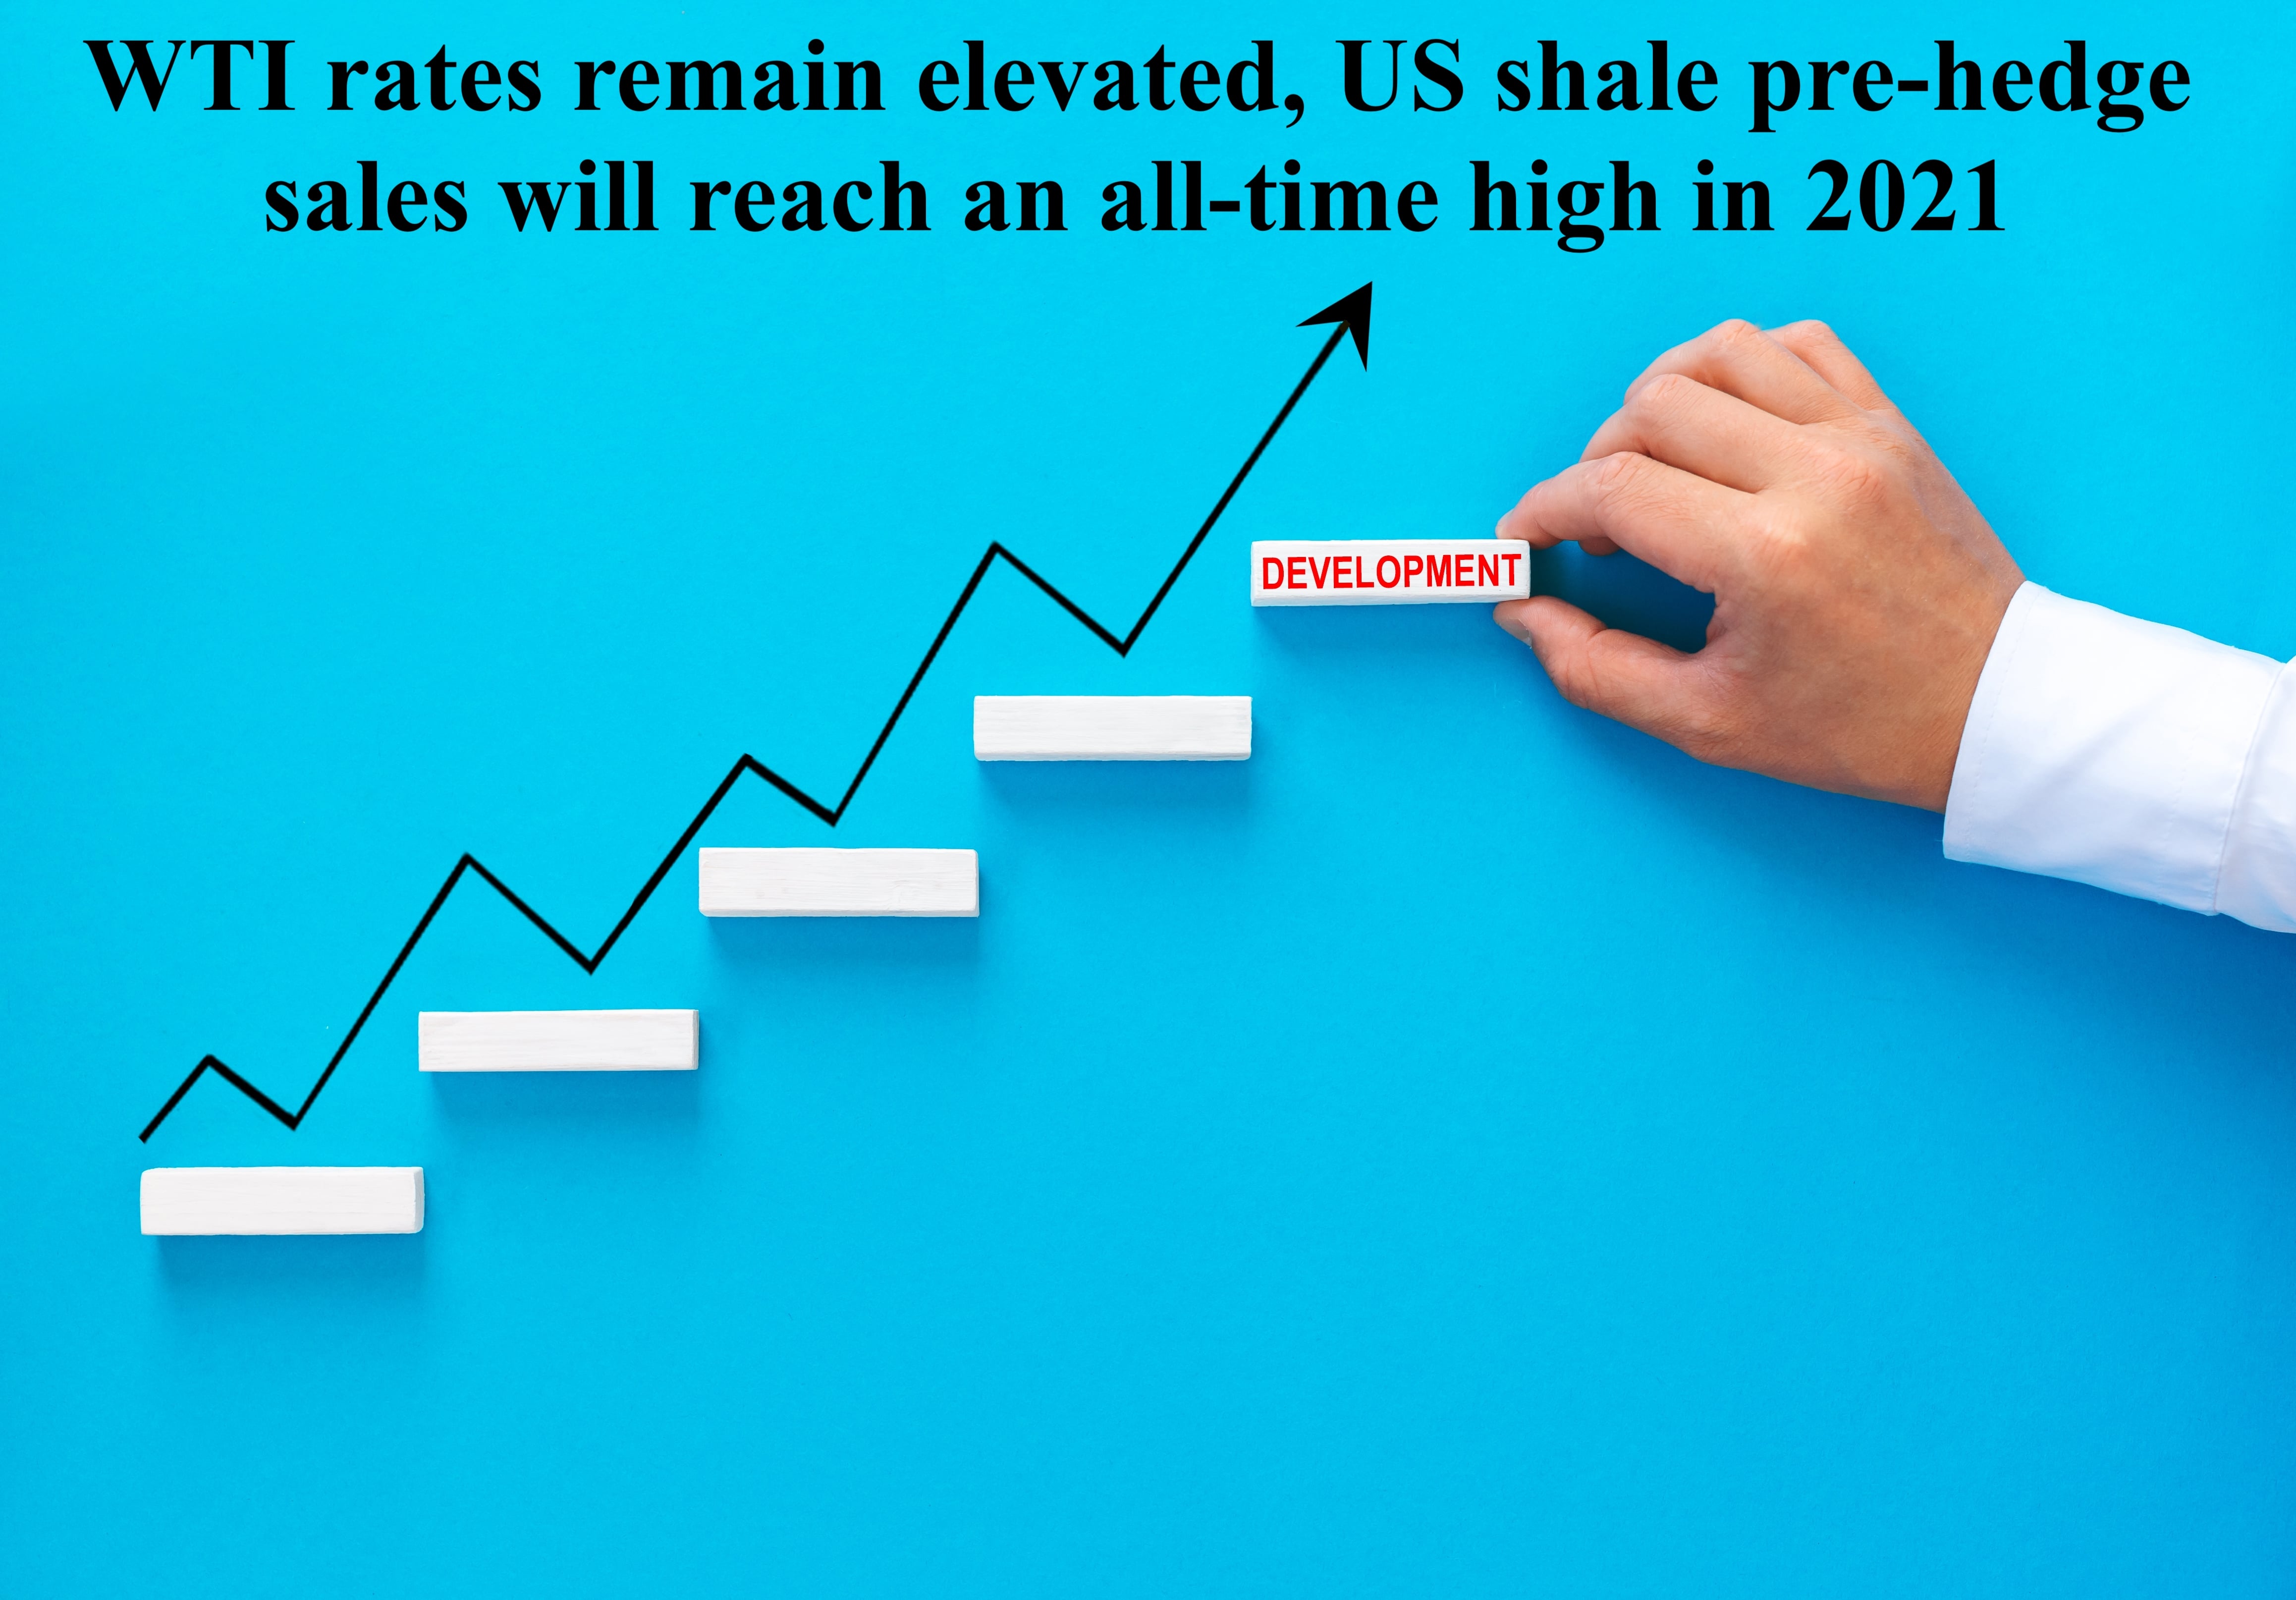 If WTI rates remain elevated, US shale pre-hedge sales will reach an all-time high in 2021